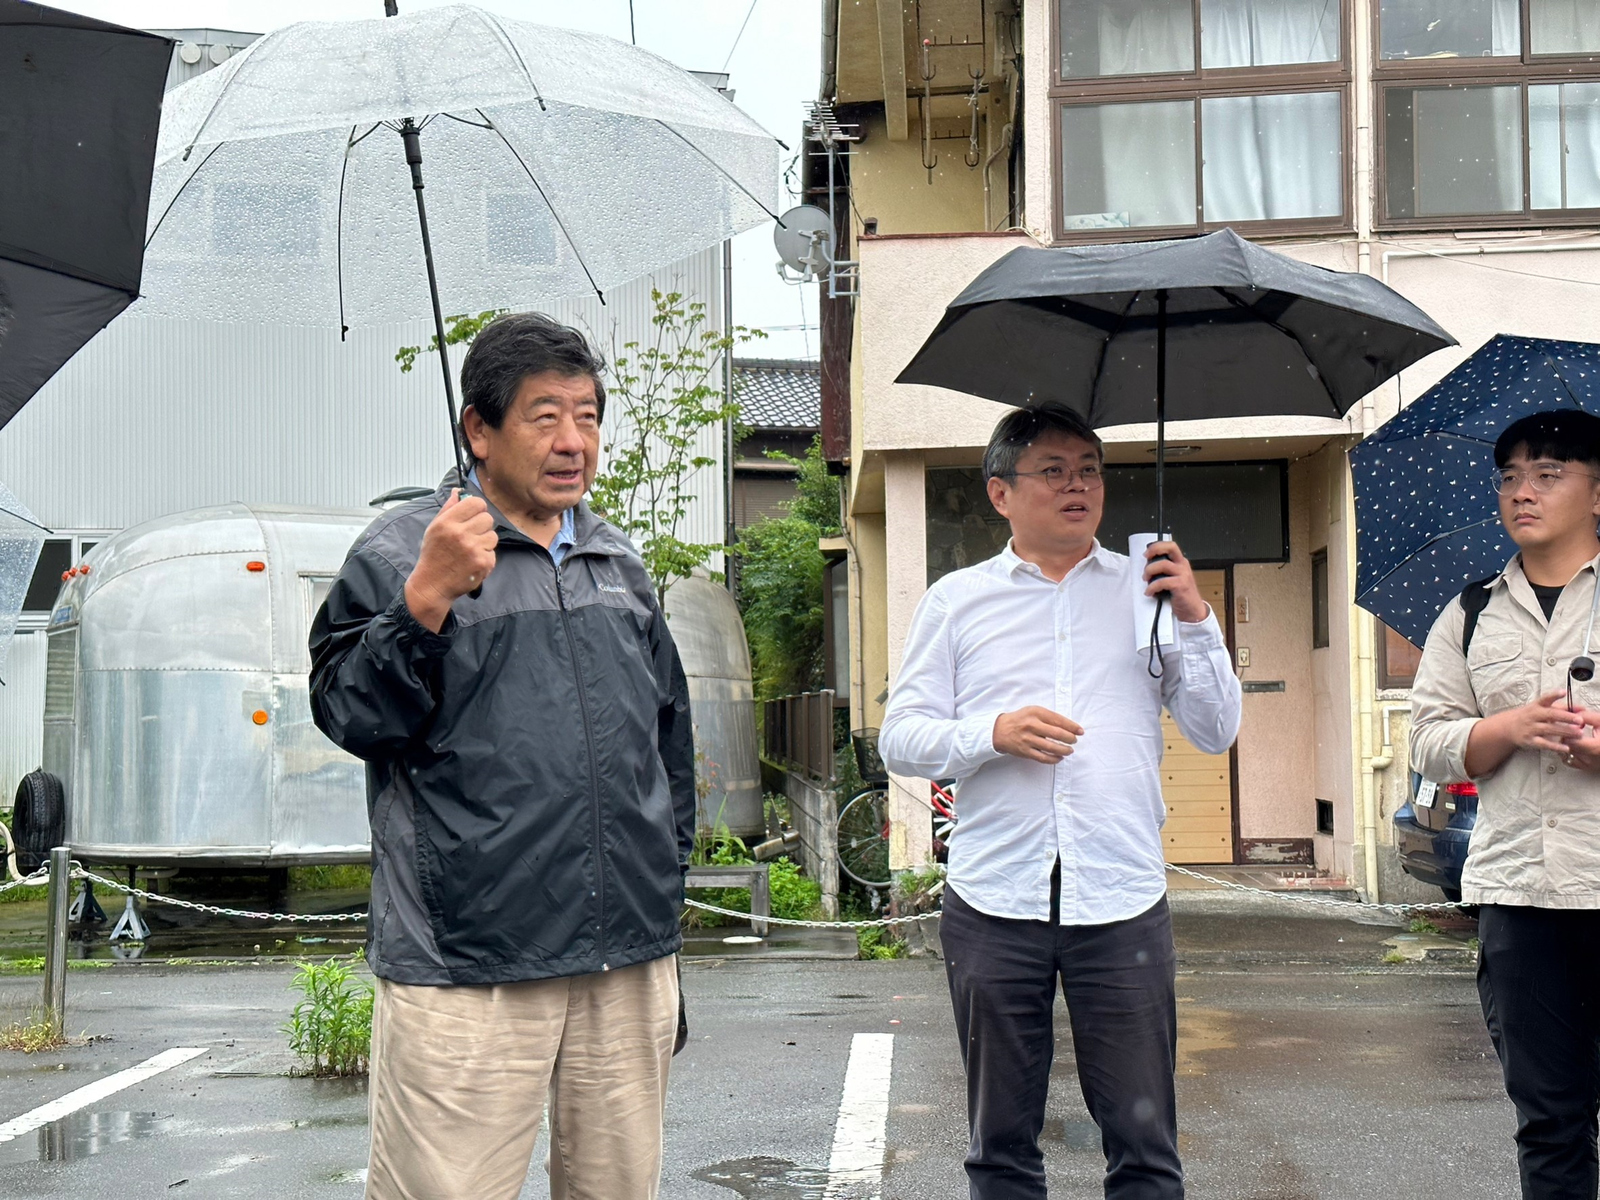 Dr. Toyohiro Watanabe, the founder of Groundwork Mishima, explained the history of the Genbe River